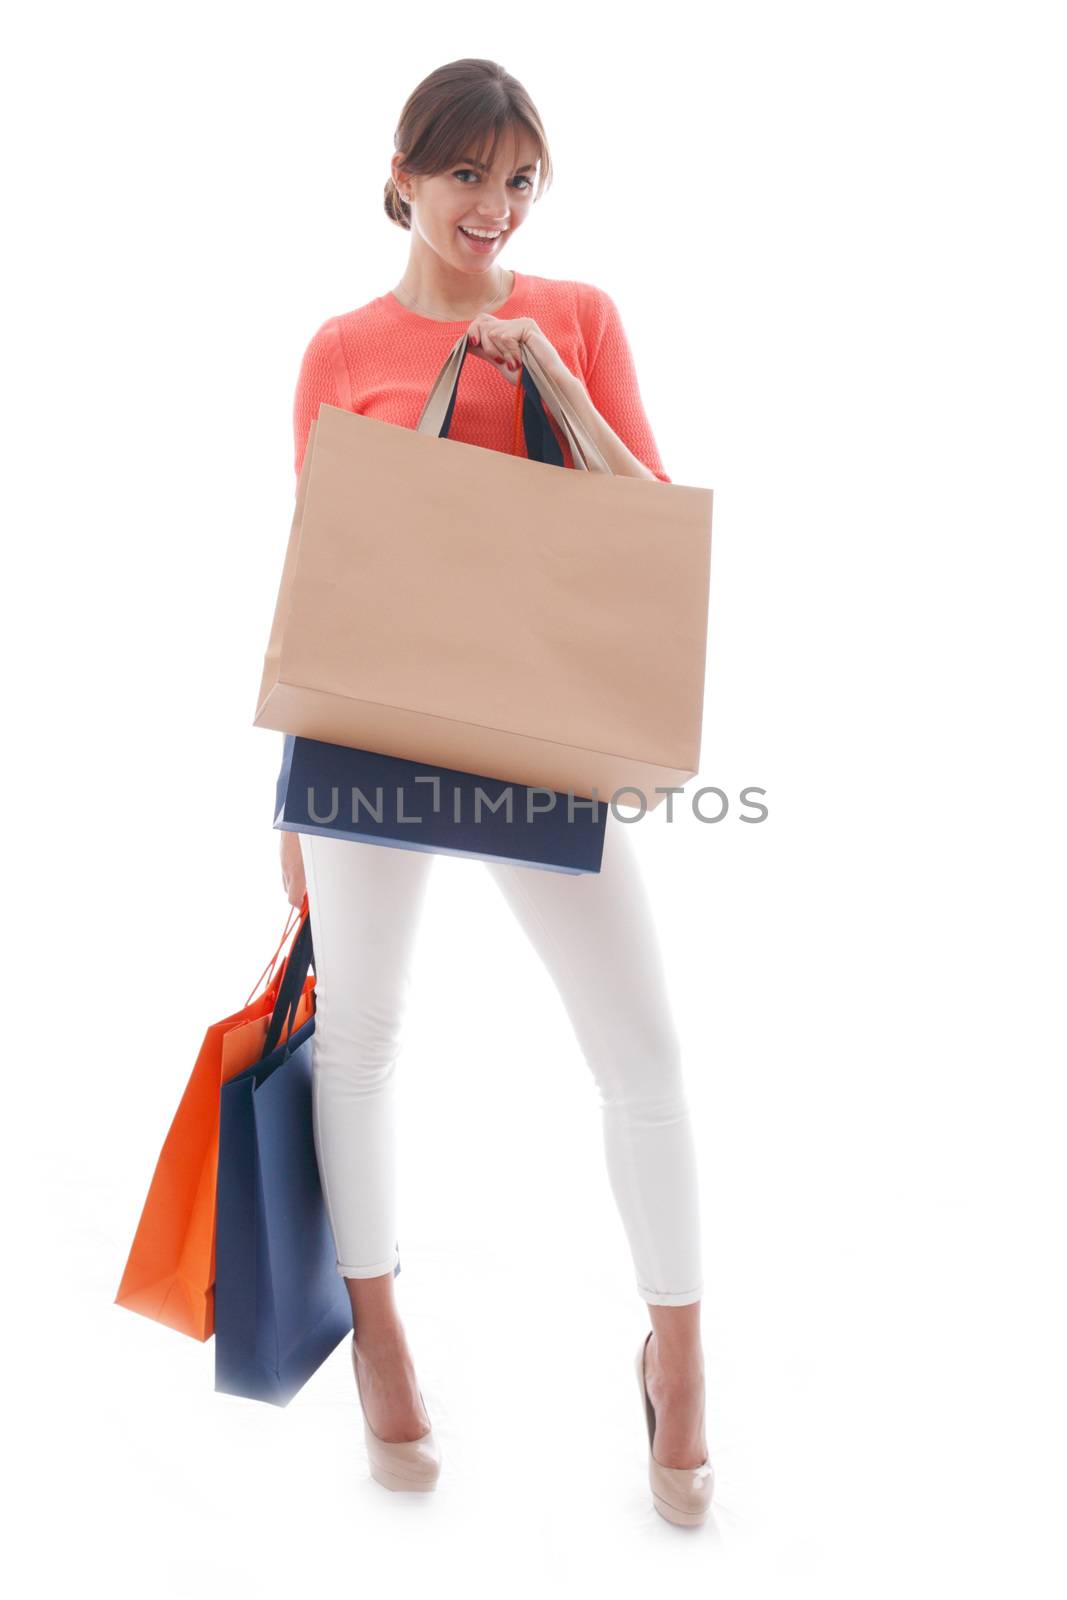 Woman with shopping bags  by ALotOfPeople